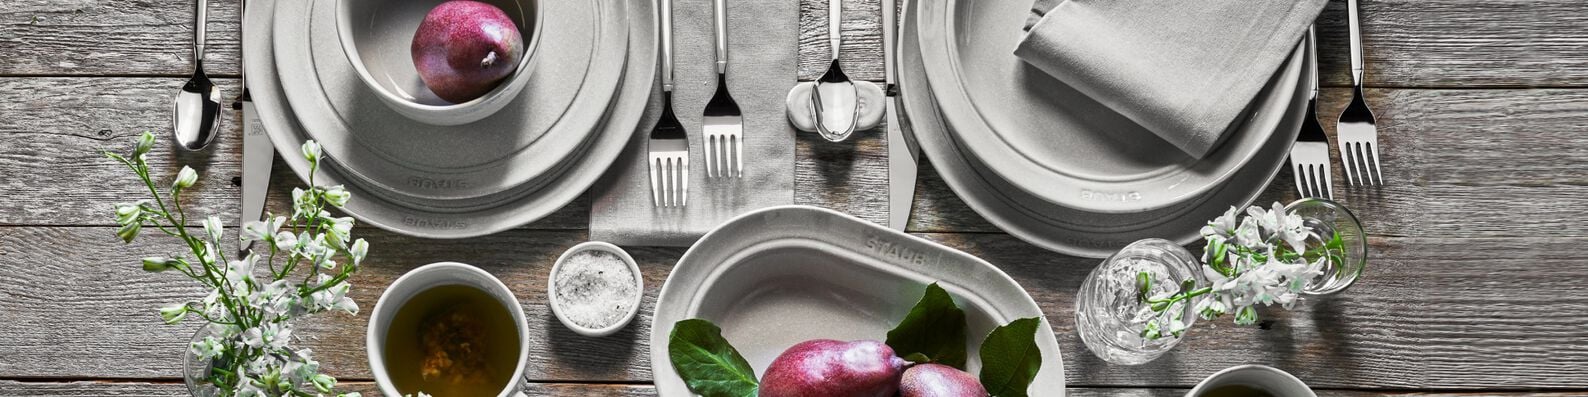 Zwilling - Save 20% on Dinnerware for a Limited Time!